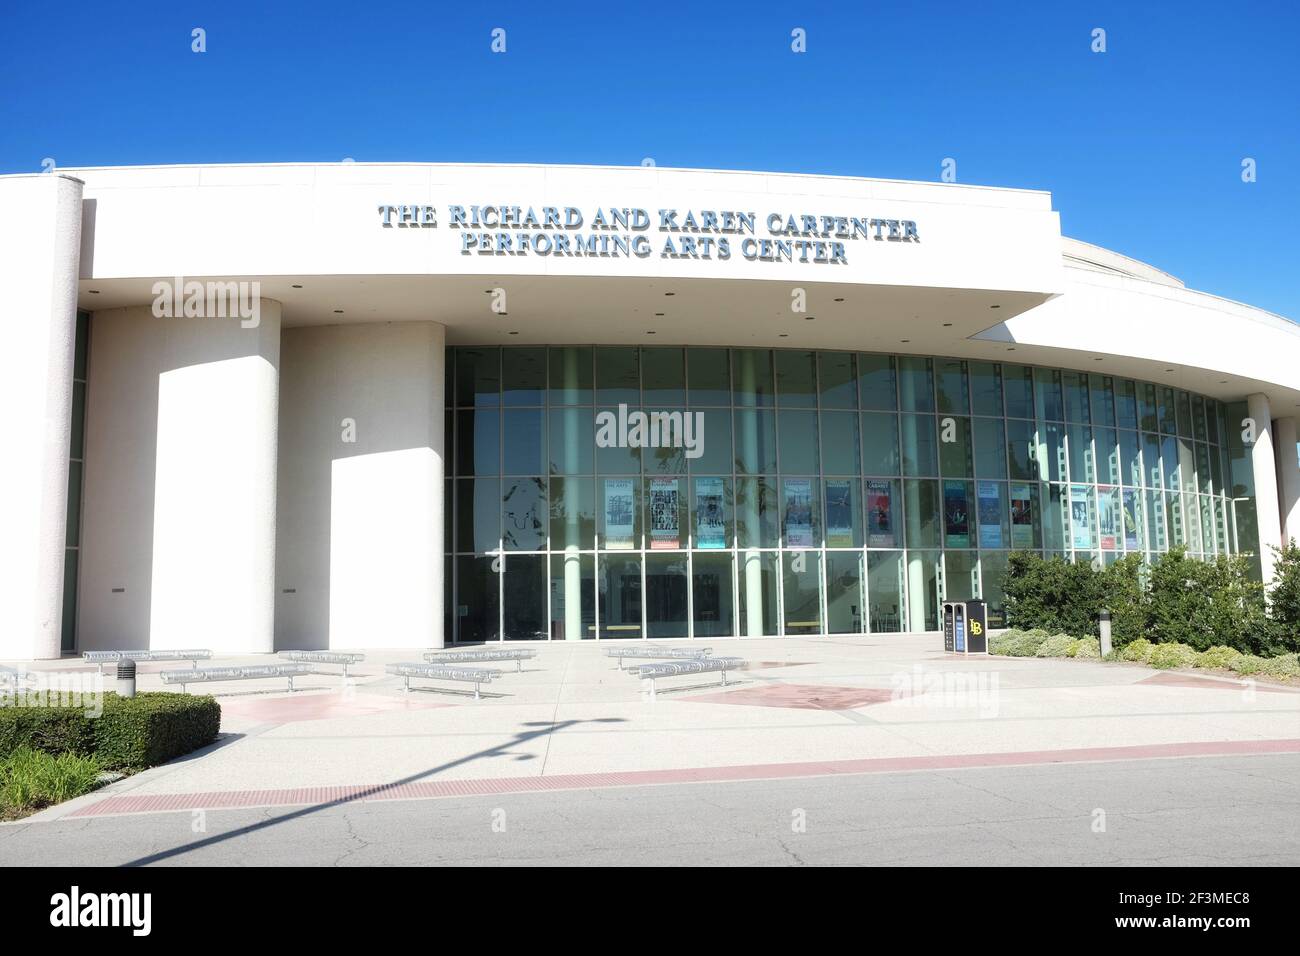 LONG BEACH, CALIFORNIA - 16 MAR 2021: Marquee in front of The Richard and Karen Carpenter Performing Arts Center at California State University Long B Stock Photo